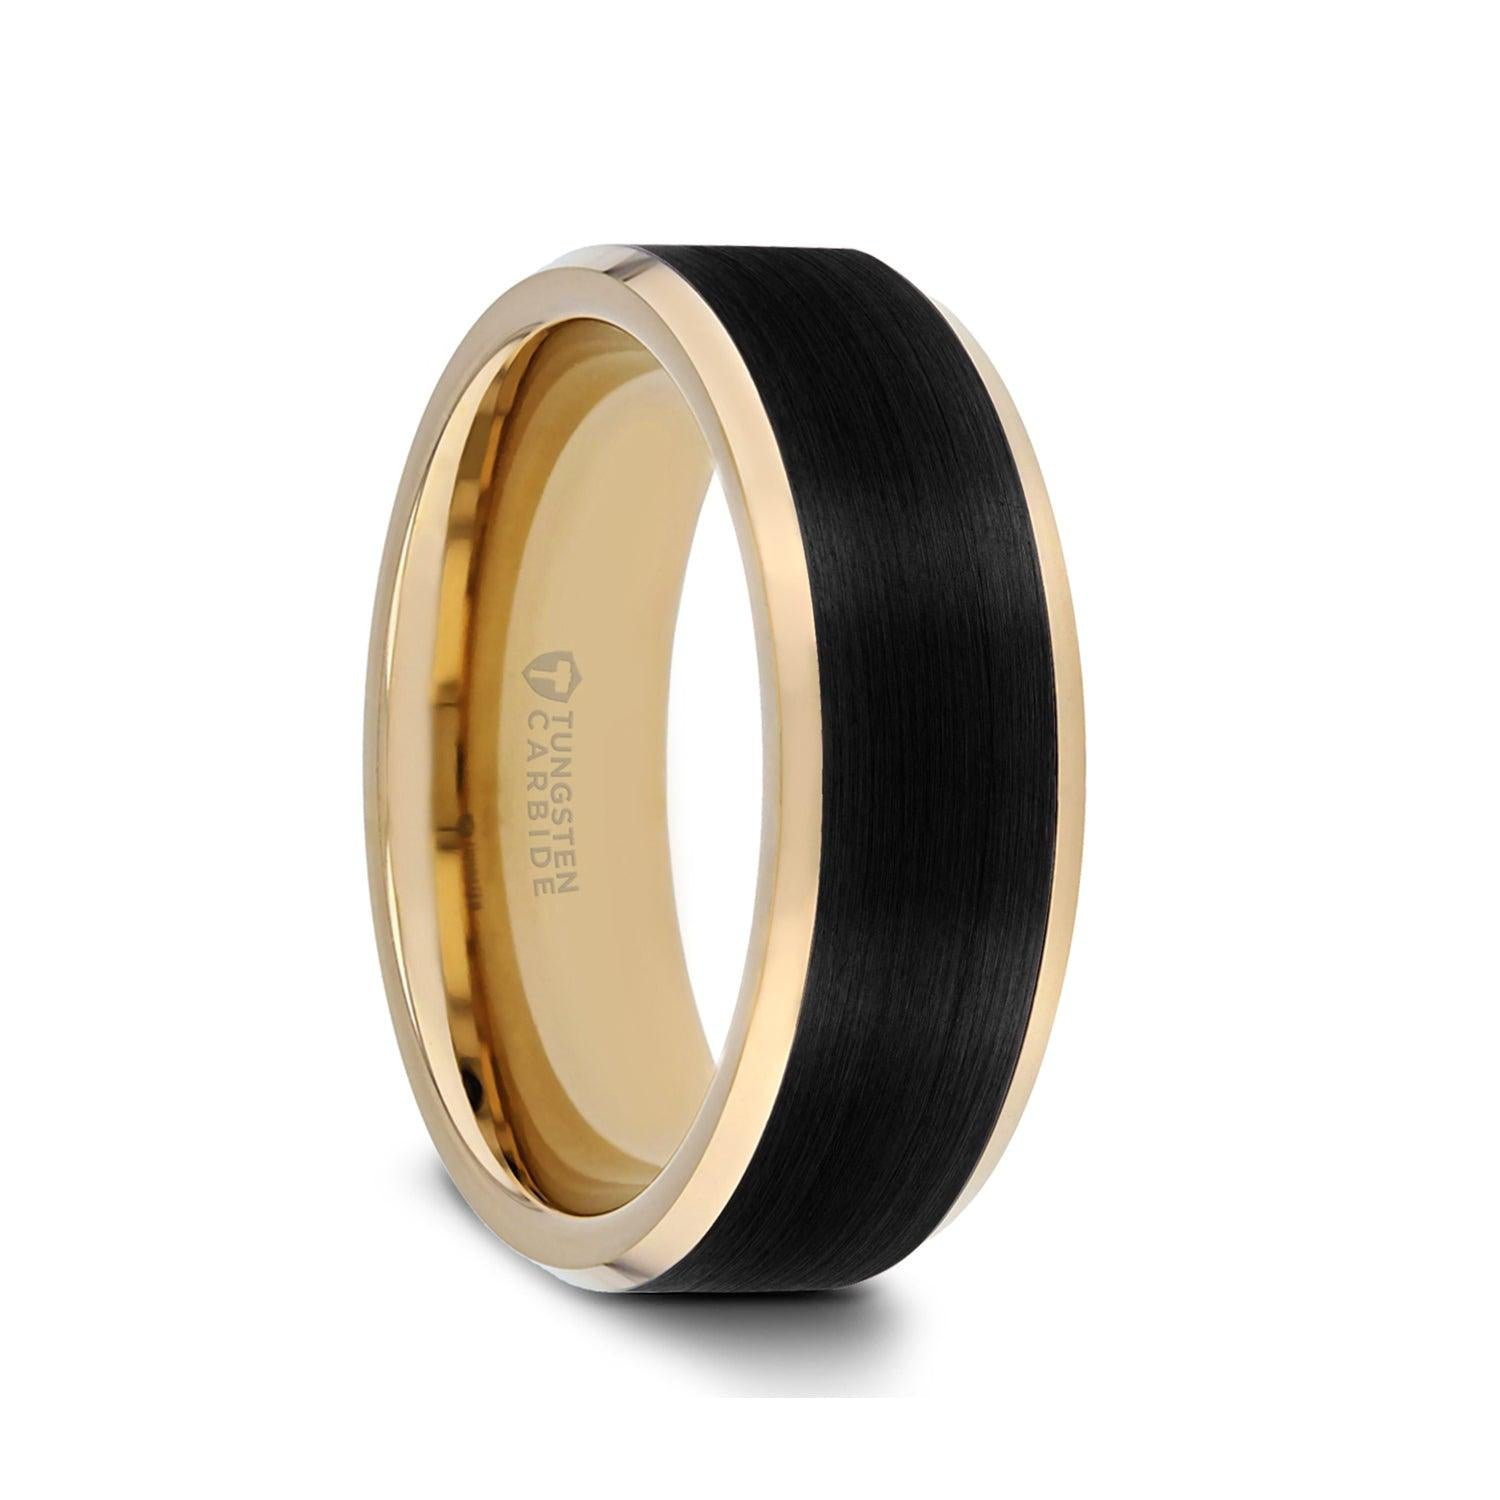 GASTON - Gold Plated Tungsten Polished Beveled Ring with Brushed Black Center - 6mm 8mm - The Rutile Ltd